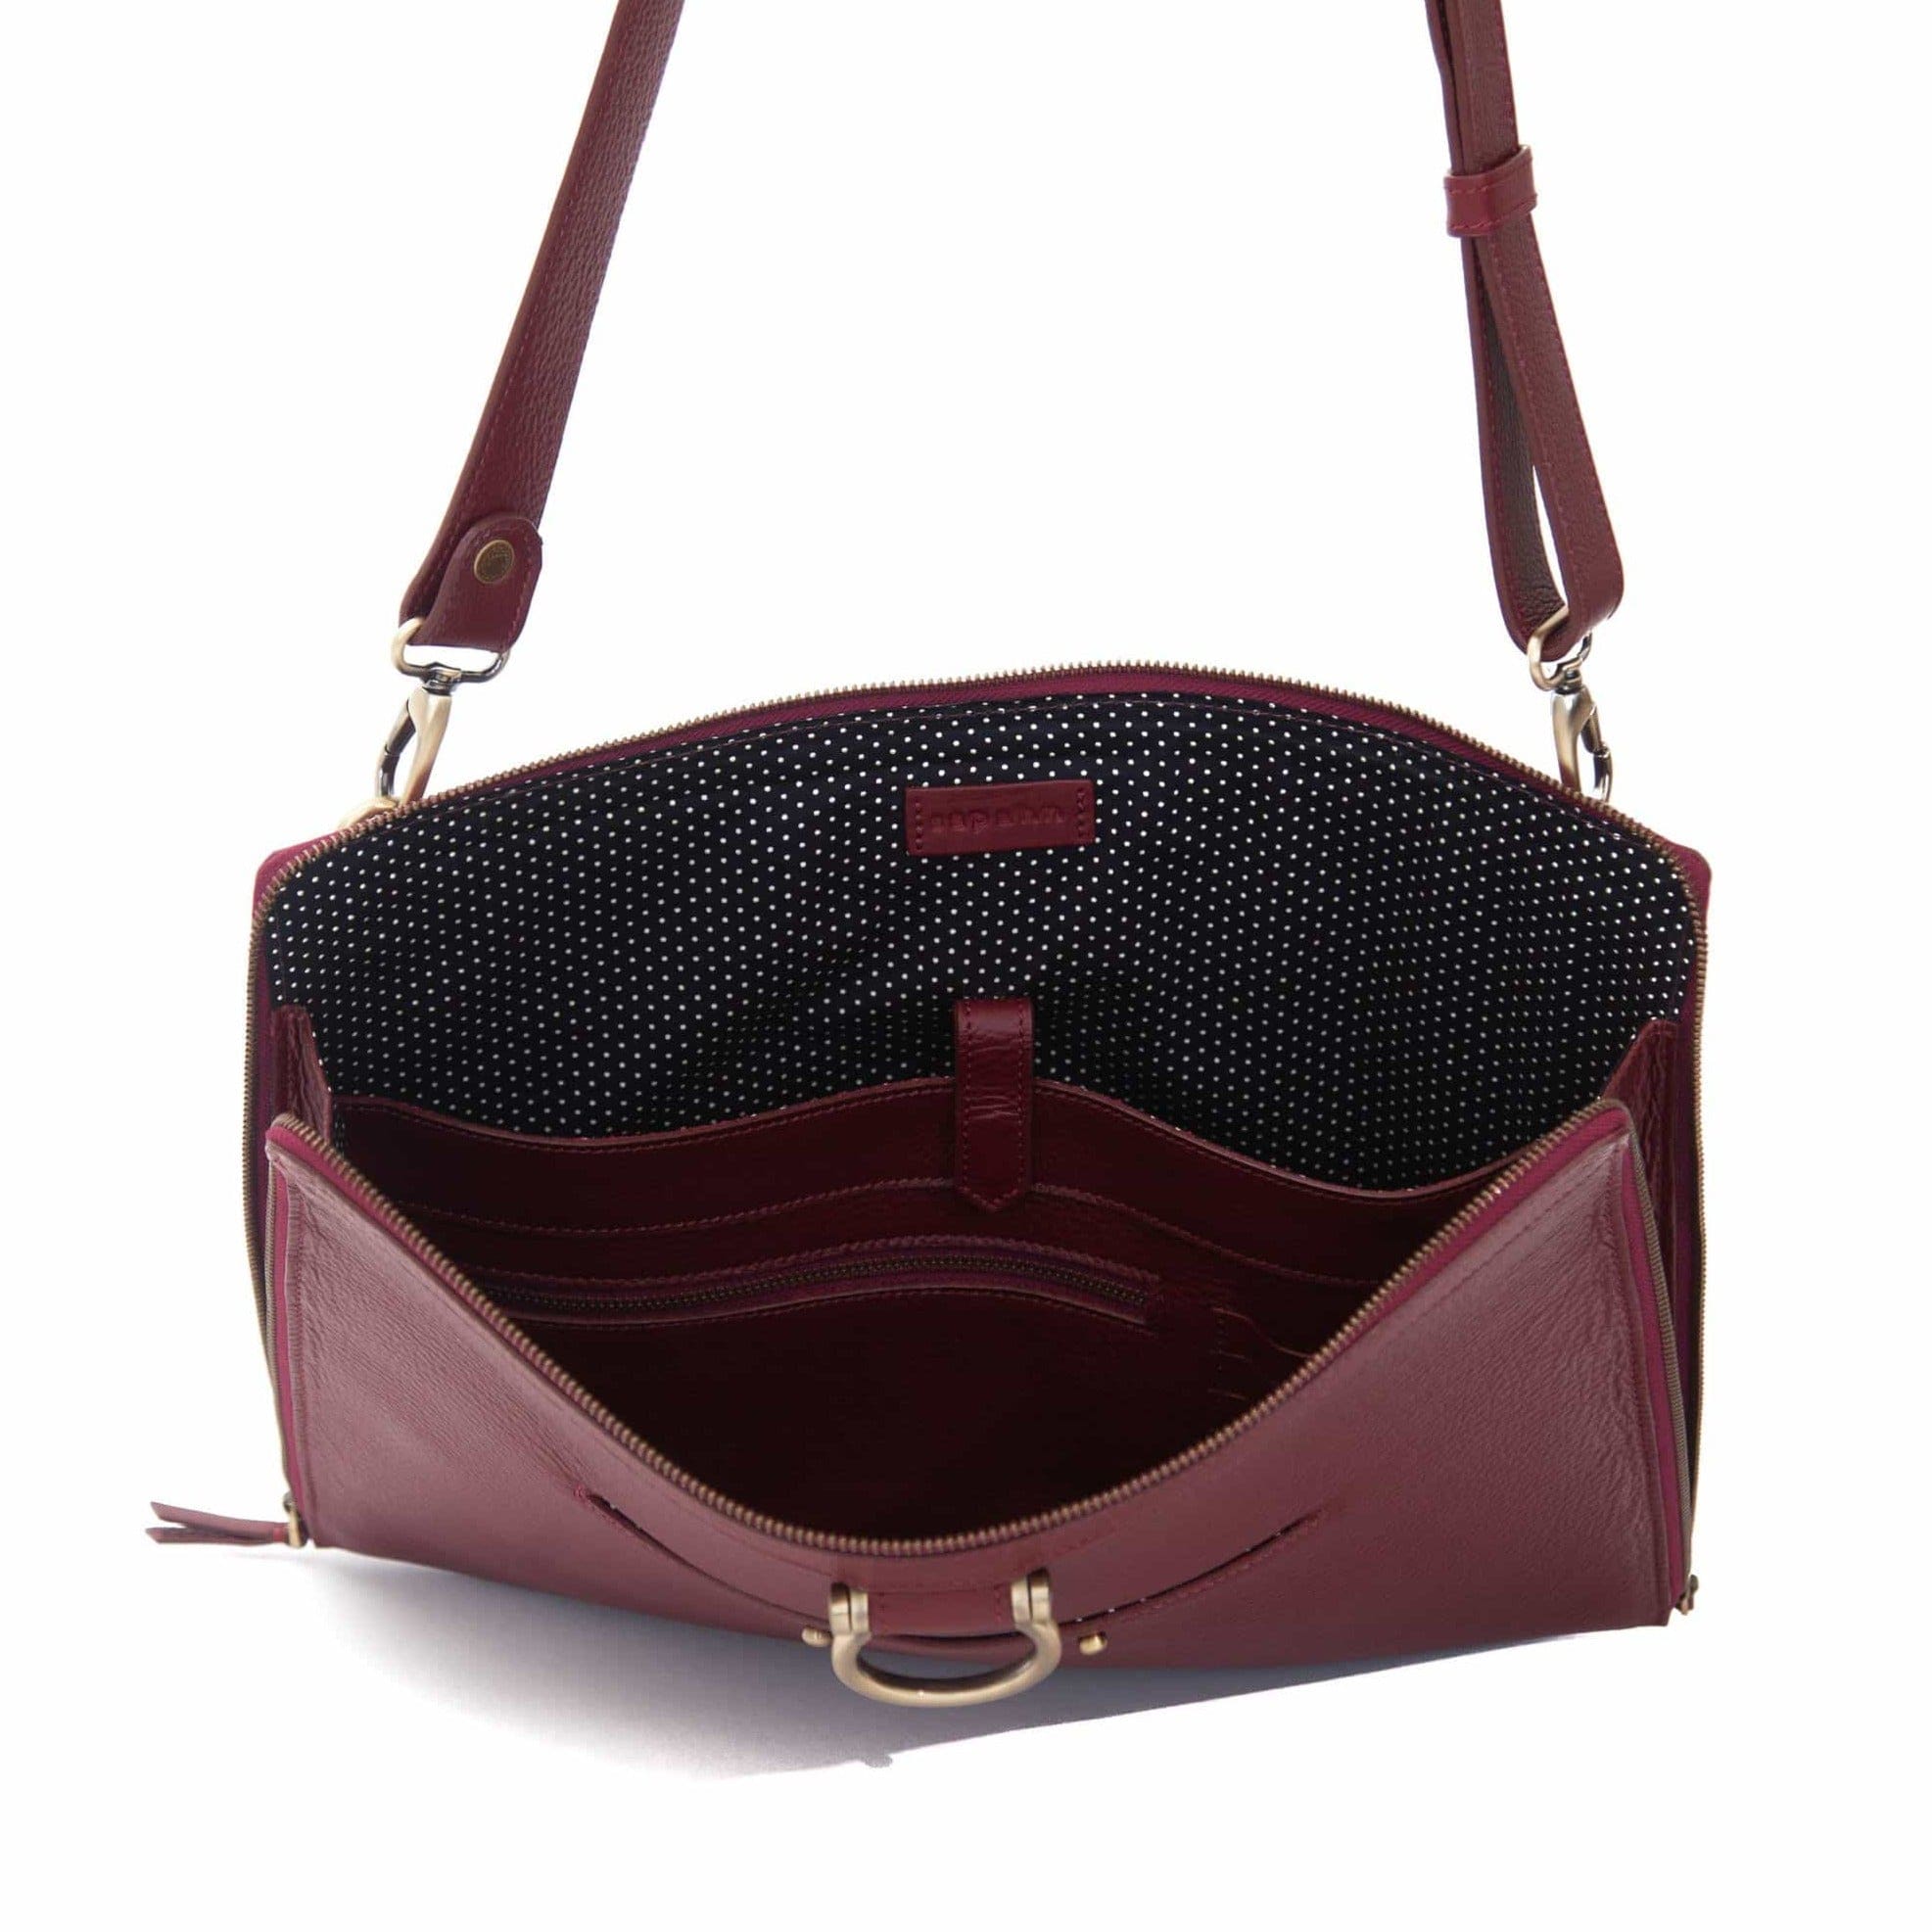 The M XL crossbody bag in deep red oil leather will hold your 15” laptop in a scratch-resistant interior sleeve.